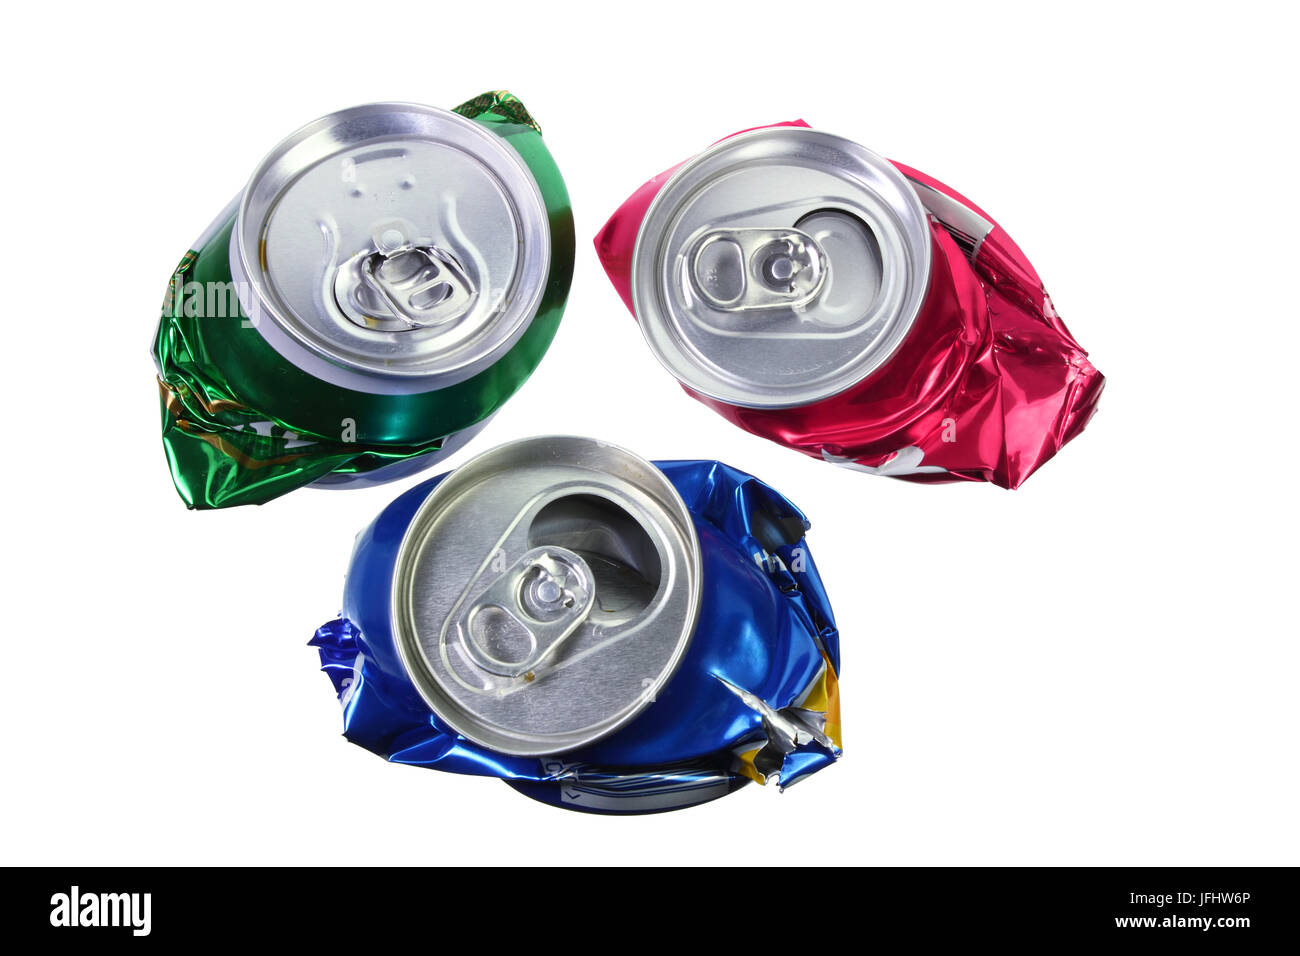 Crushed Cans on White Background Stock Photo